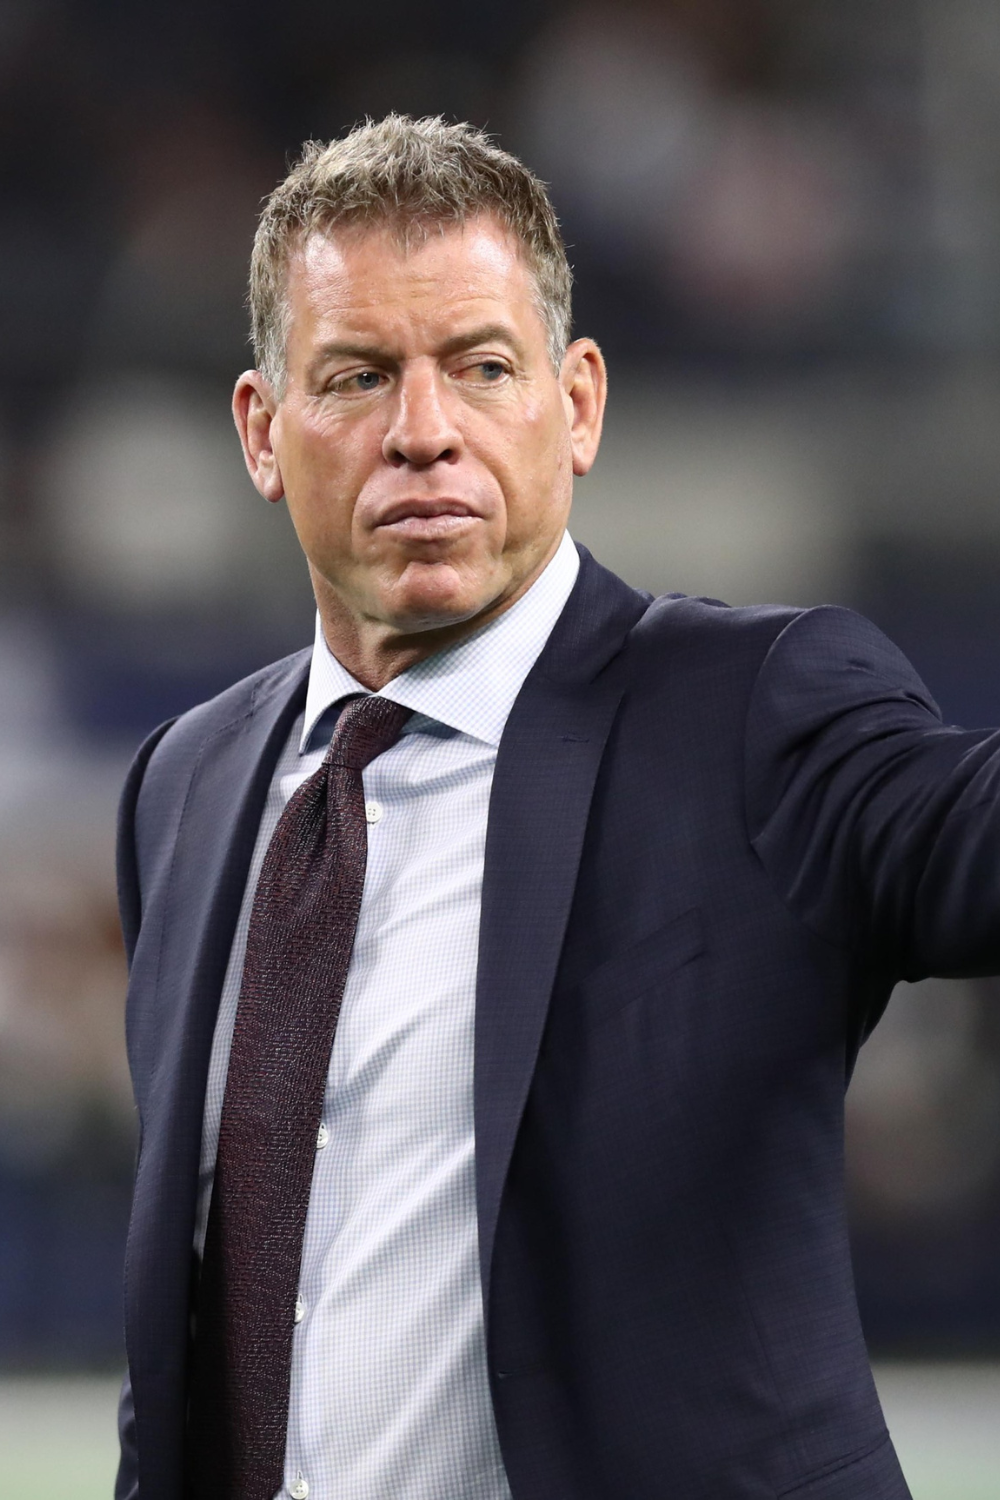 Troy Aikman, Former NFL Player And Game Analyst for ESPN